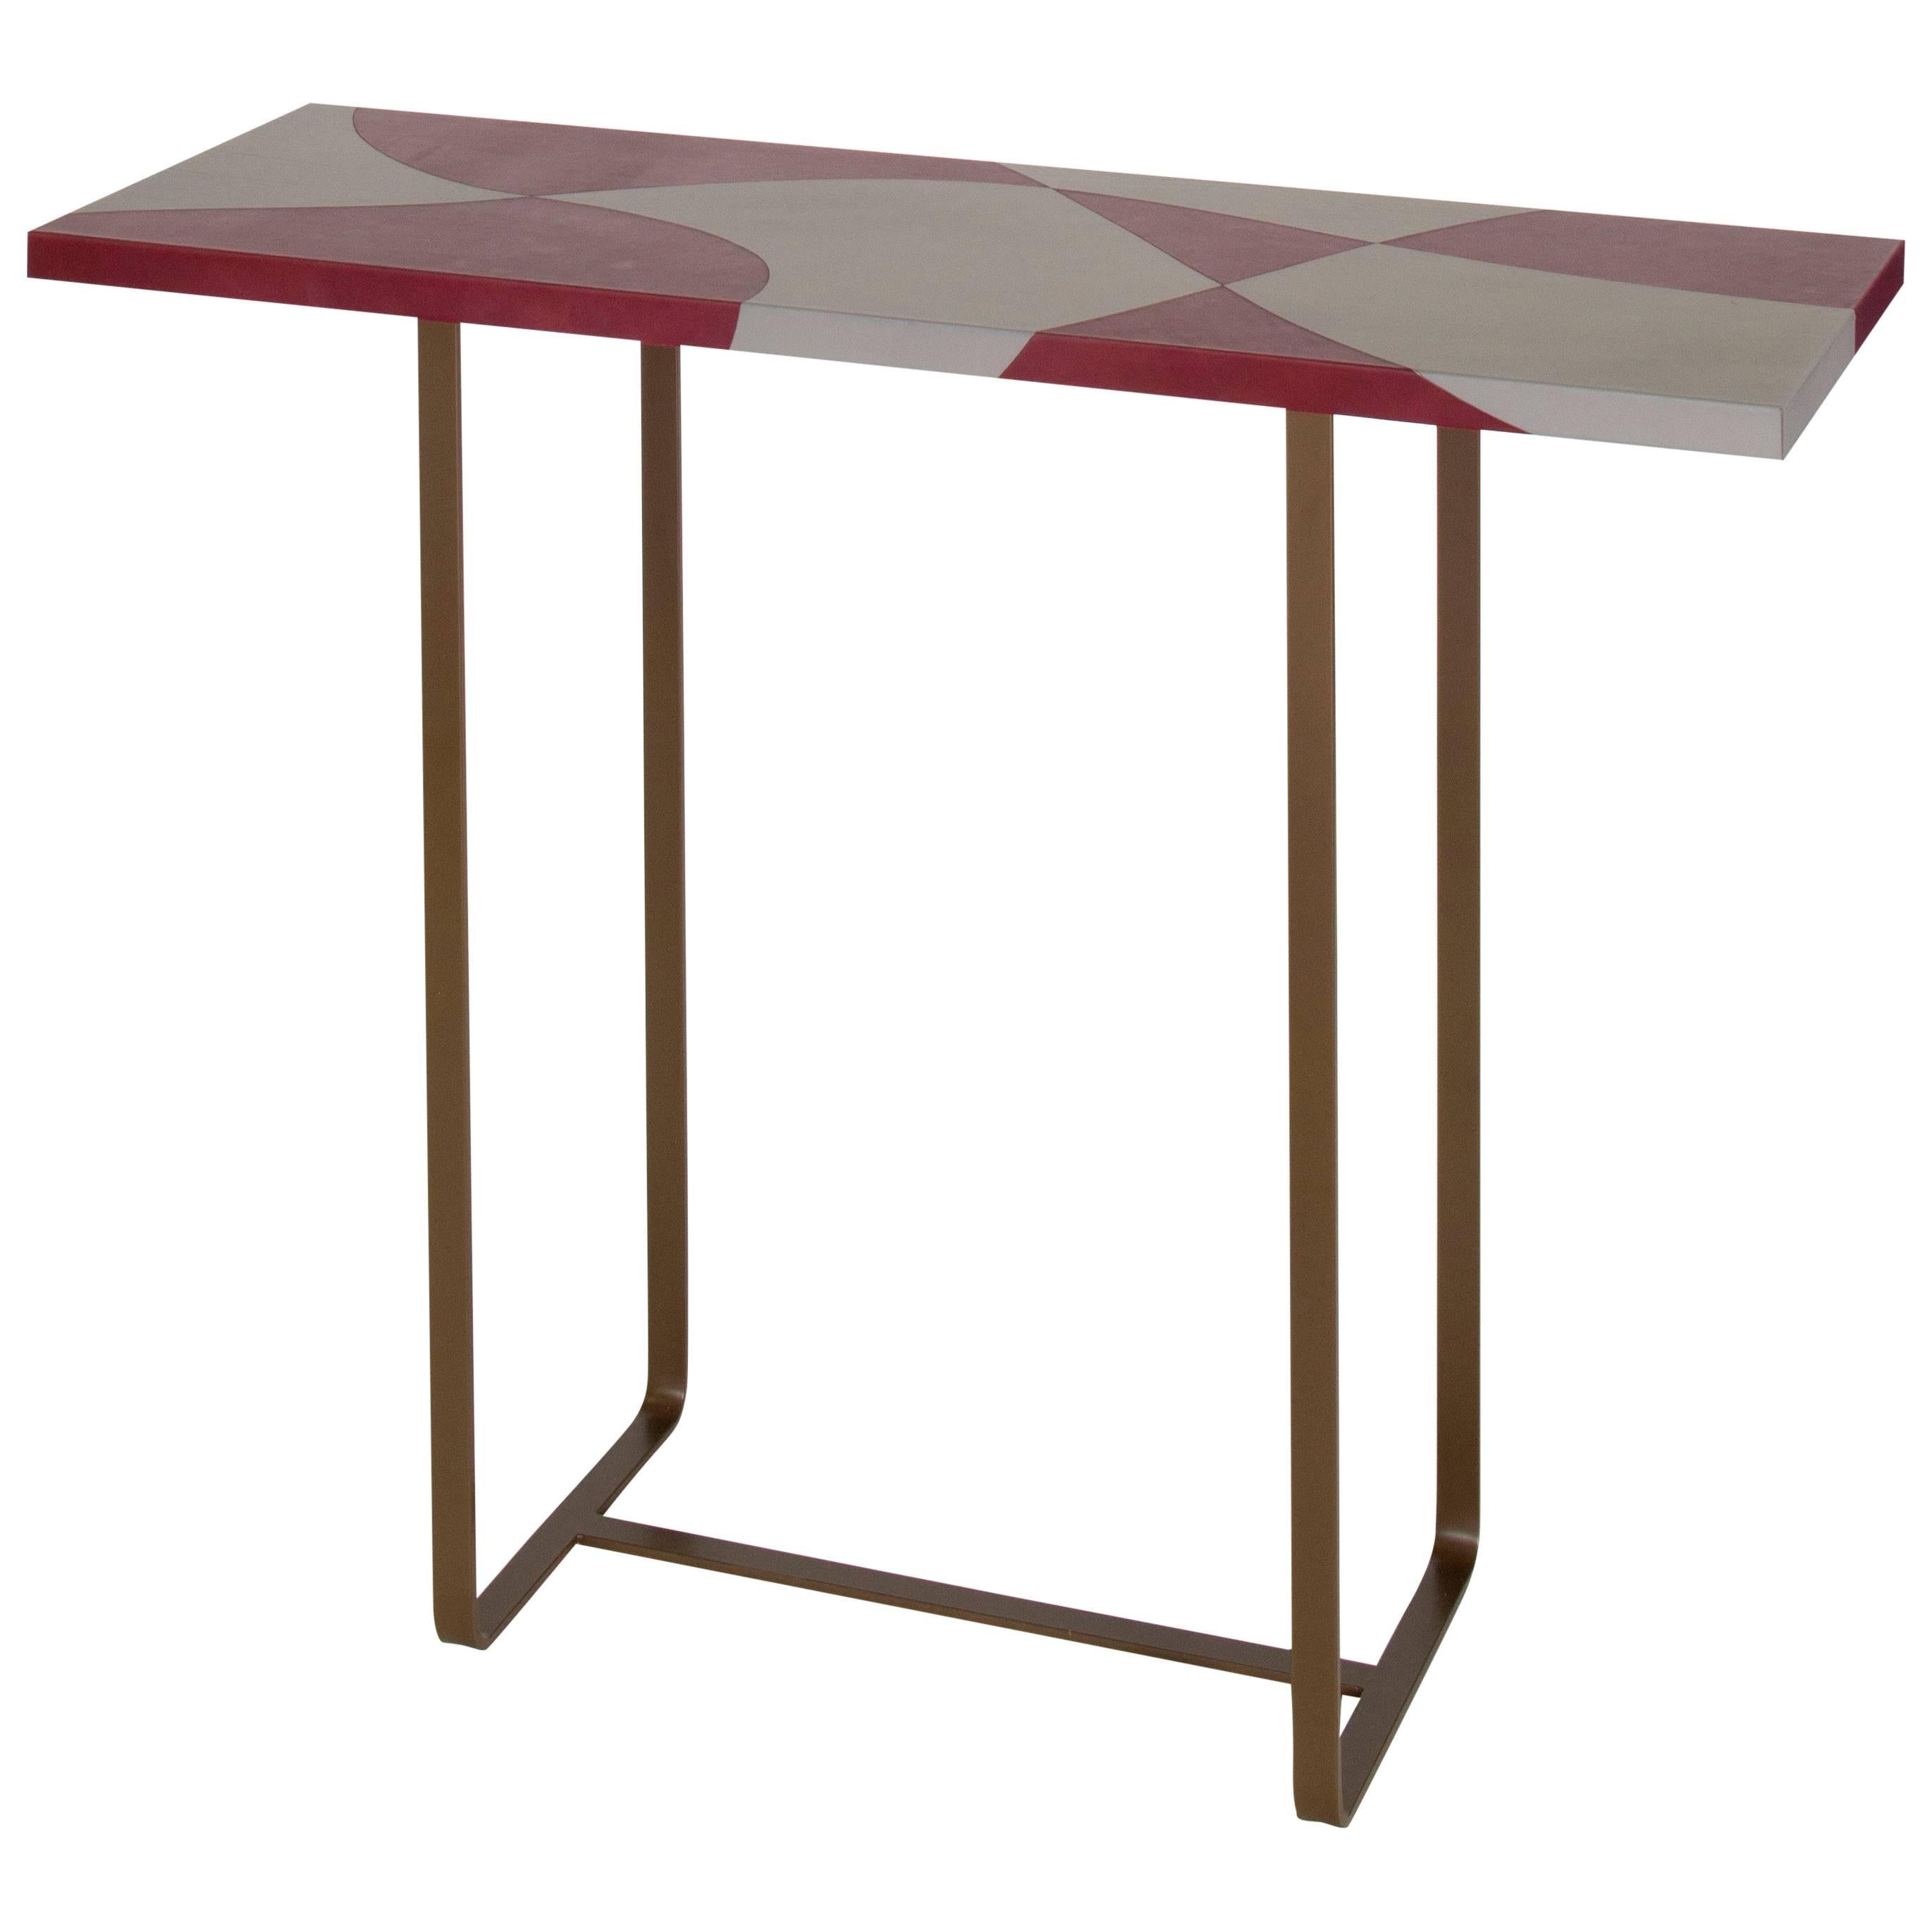 "Flores" Inlaid Leather Top Console Table by Nestor Perkal for Oscar Maschera For Sale